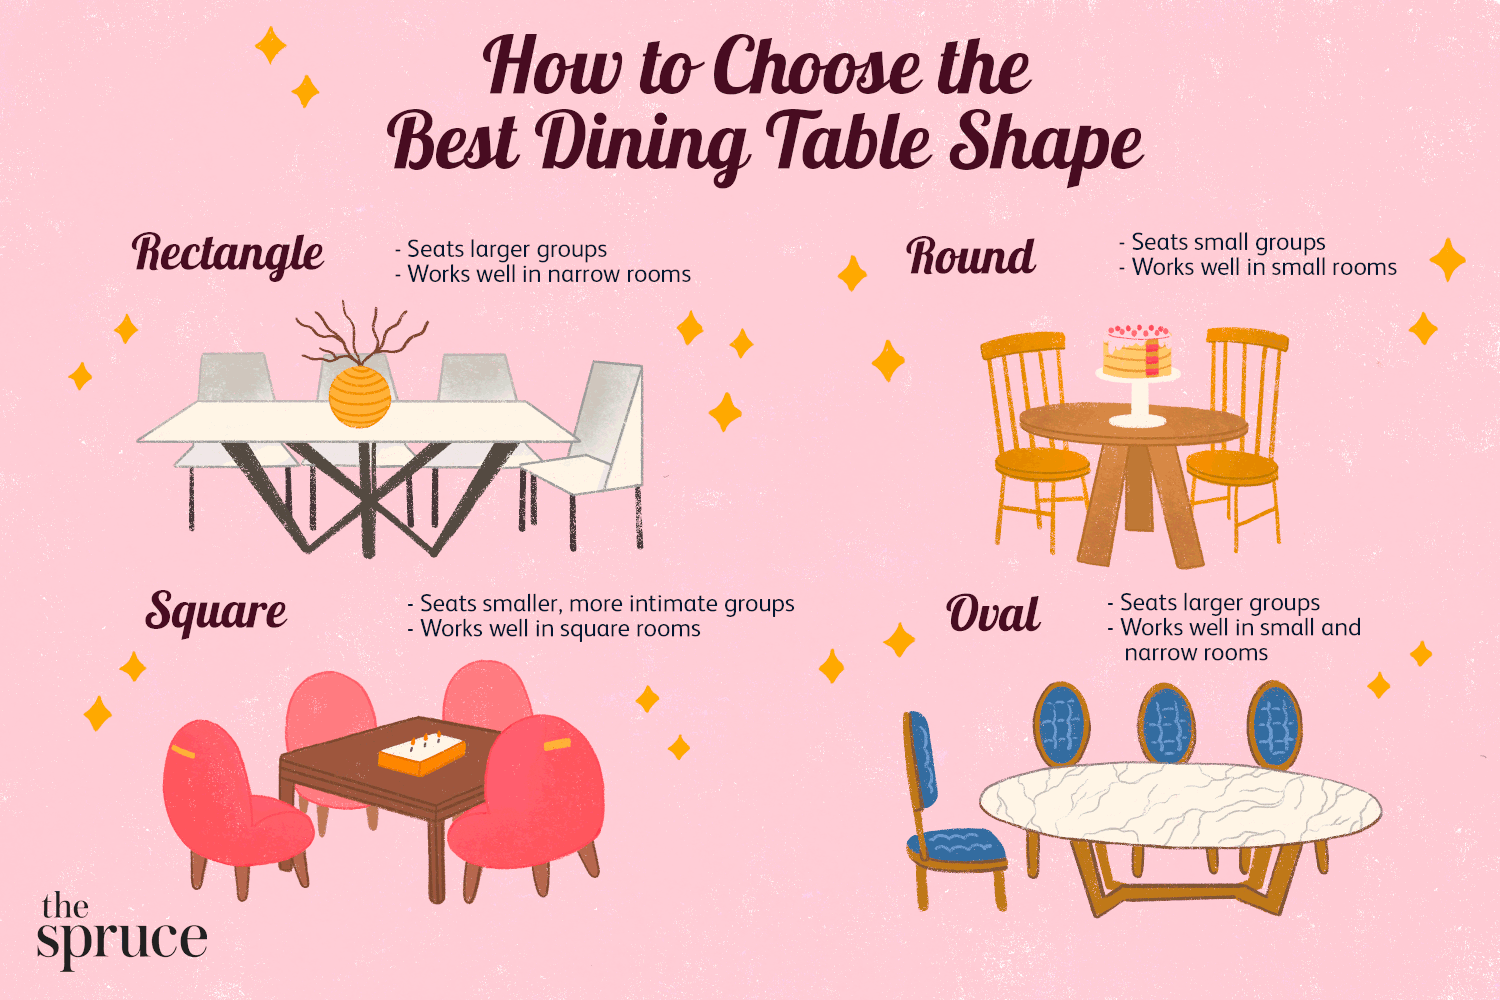 Find the Dining Table Shape That Is Right for You